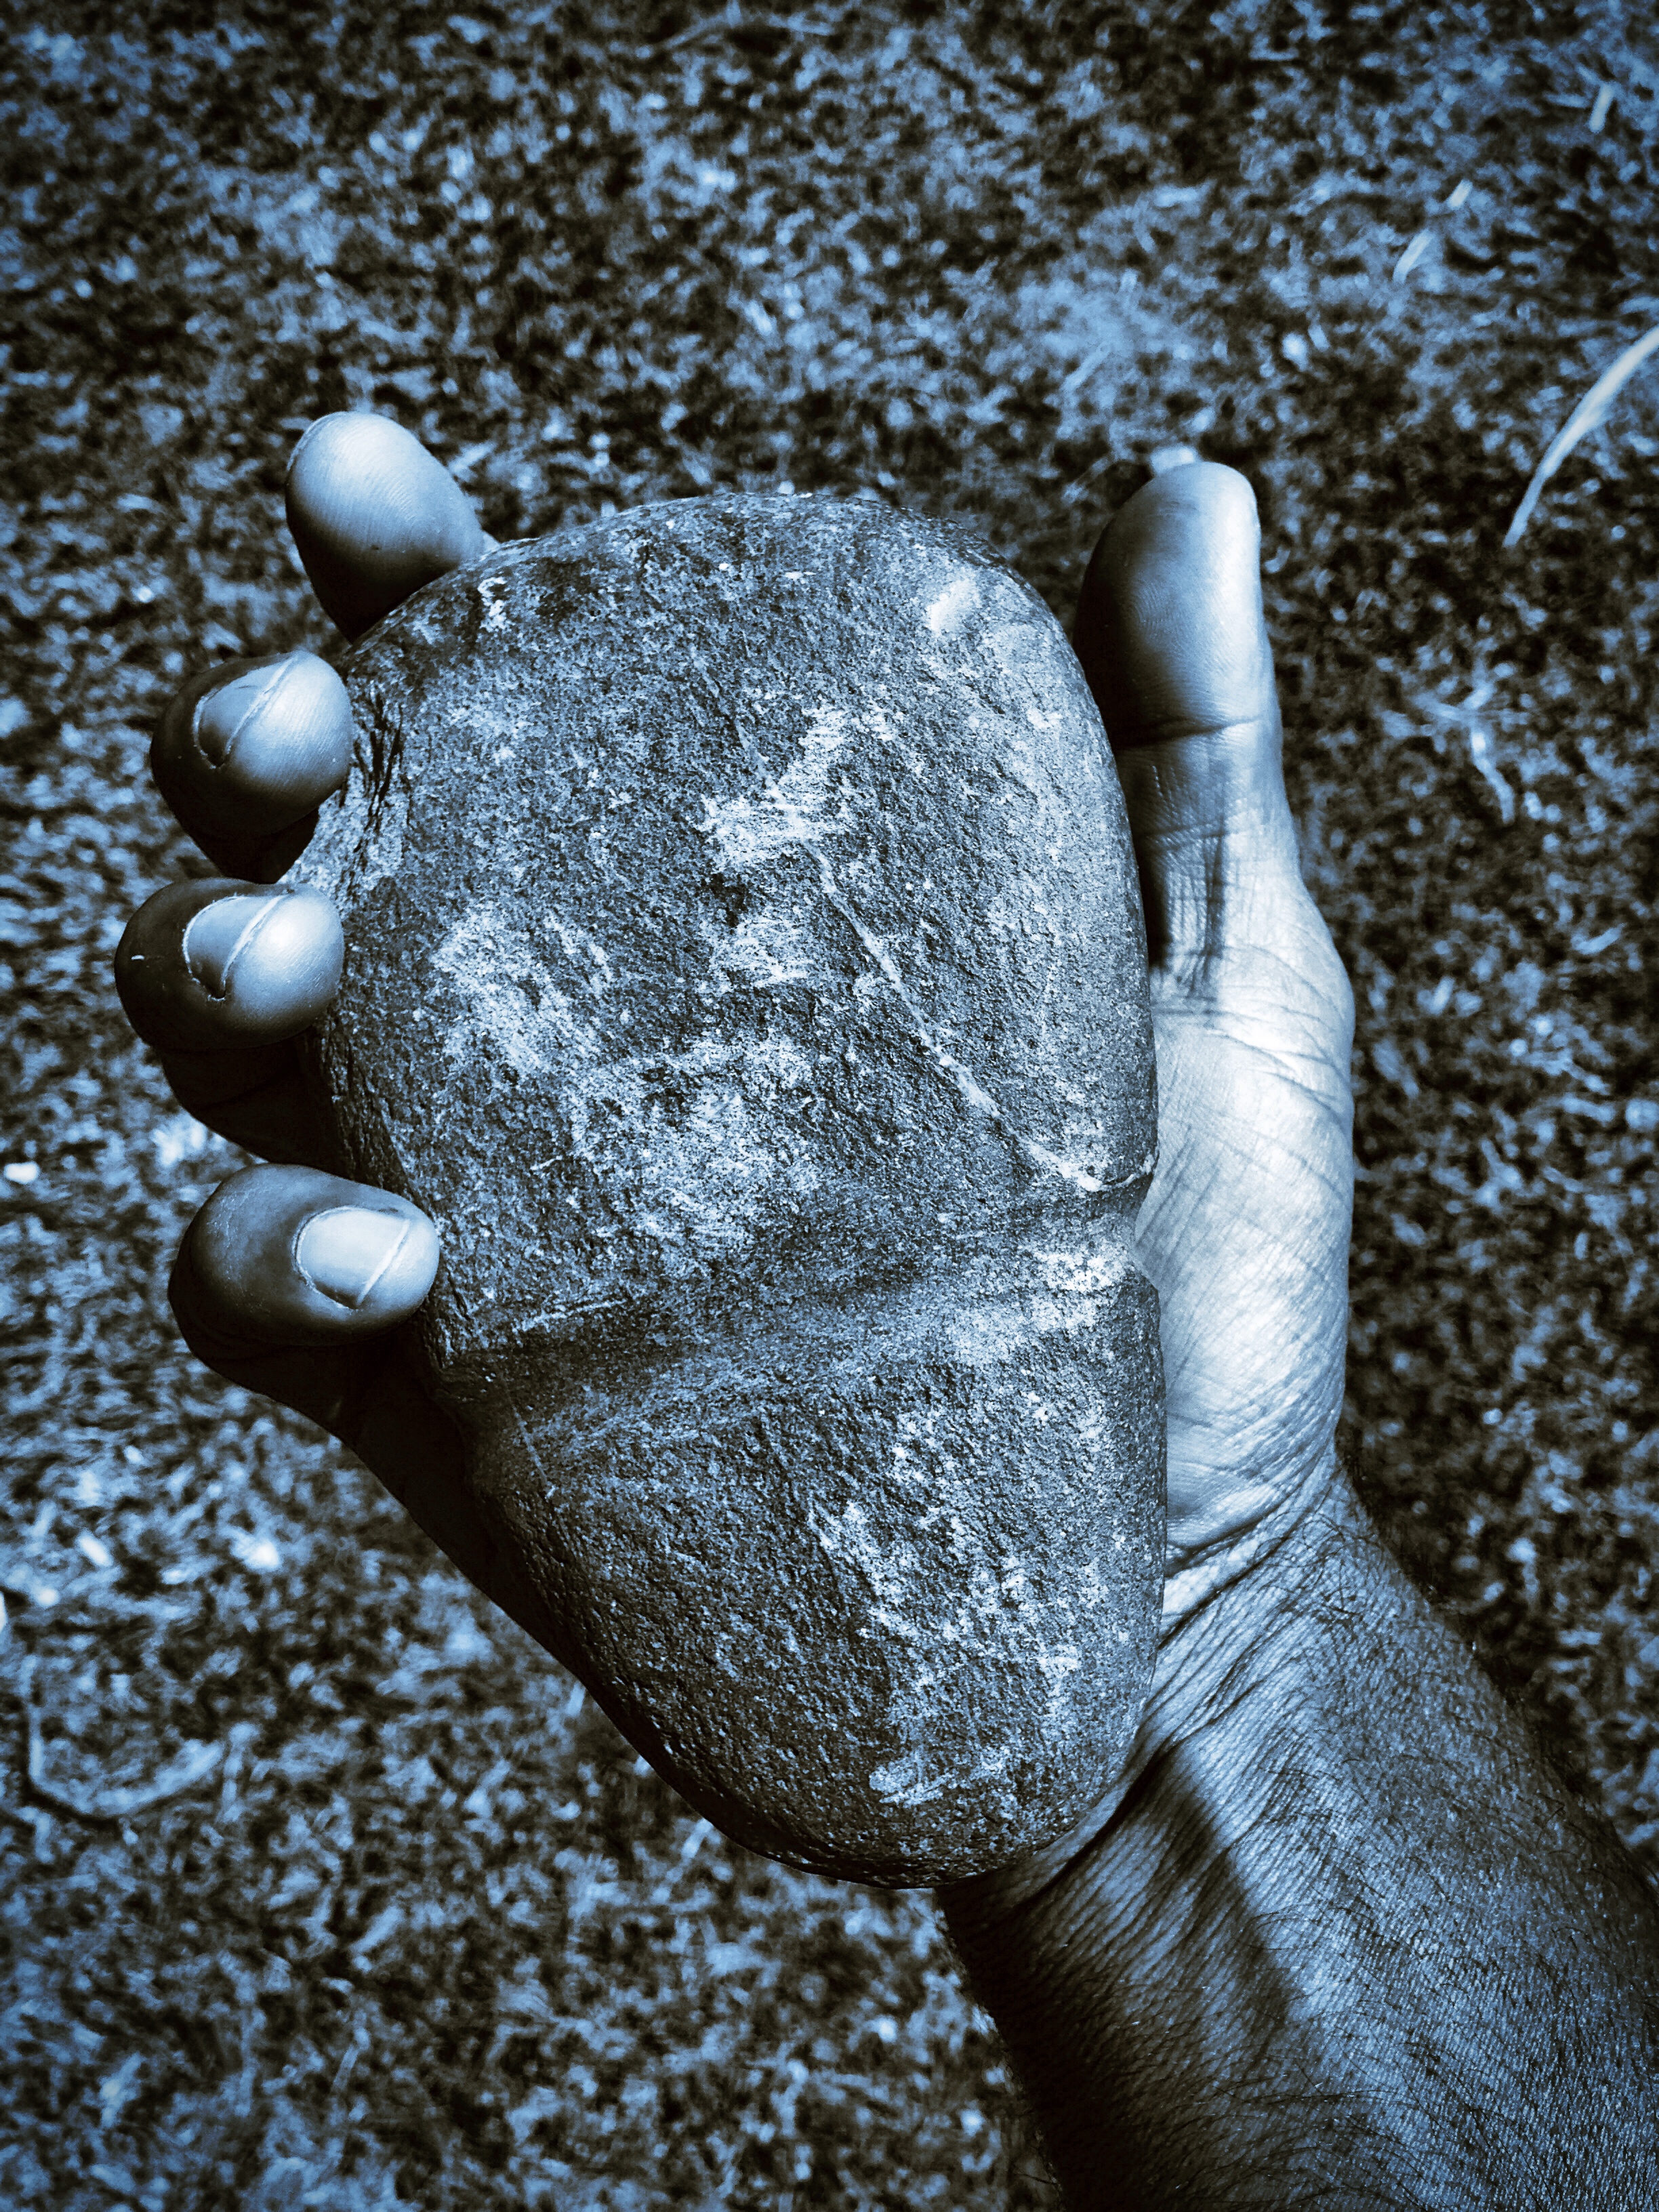 a mans hand holds an indigenous Australian axe head. The axe head is worn wear it was tied to a handle and has chips in the surface around the blade end.